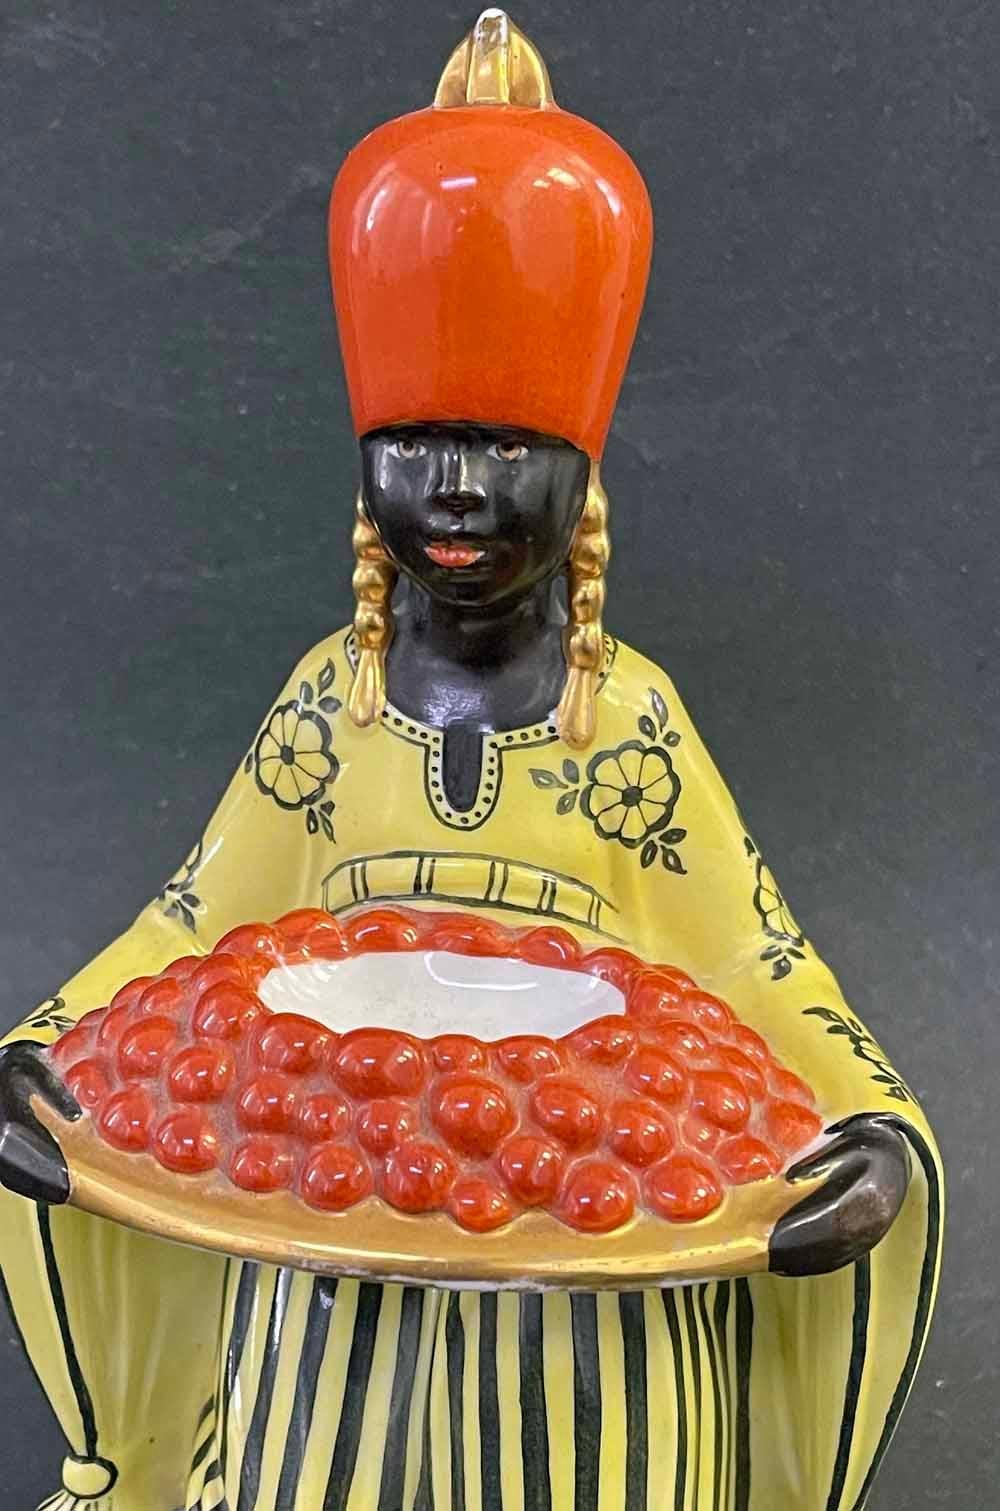 For a French woman in the 1920s, this figure of a turbaned North African woman, resplendent in a yellow robe and carrying a tray loaded with oranges, would have been exotic and fascinating.  The sculpture was designed to be internally illuminated. 